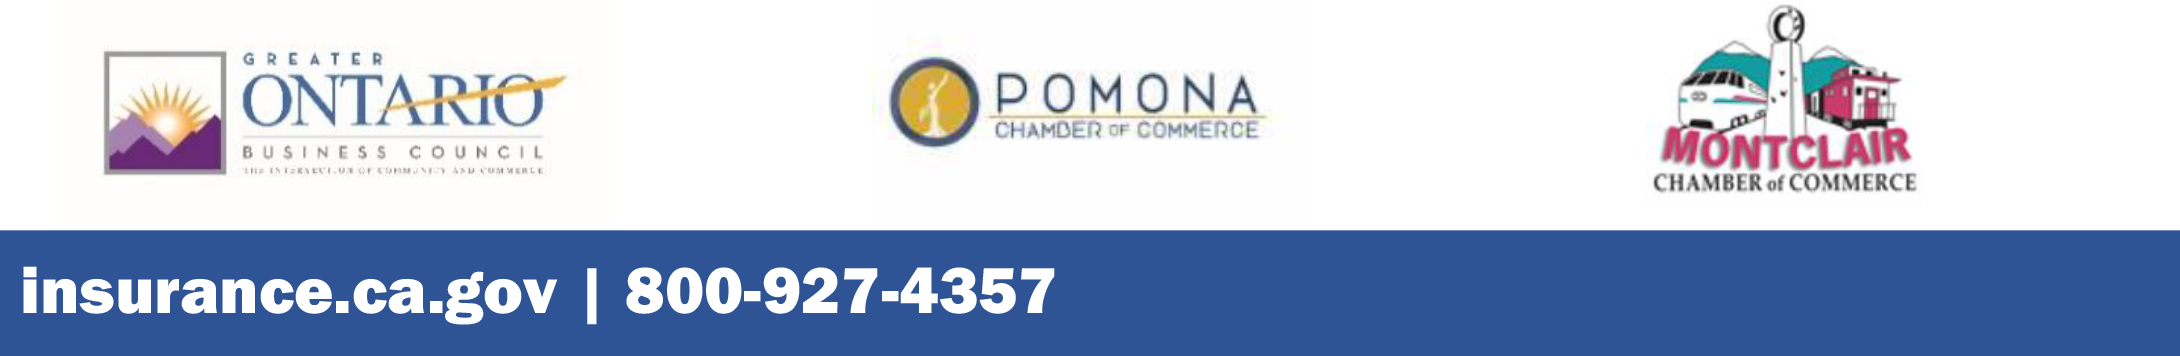  Partners: Greater Ontario Business Council, Pomona Chamber of Commerce, Montclair Chamber of Commerce, Insurance.ca.gov, 800-927-4357